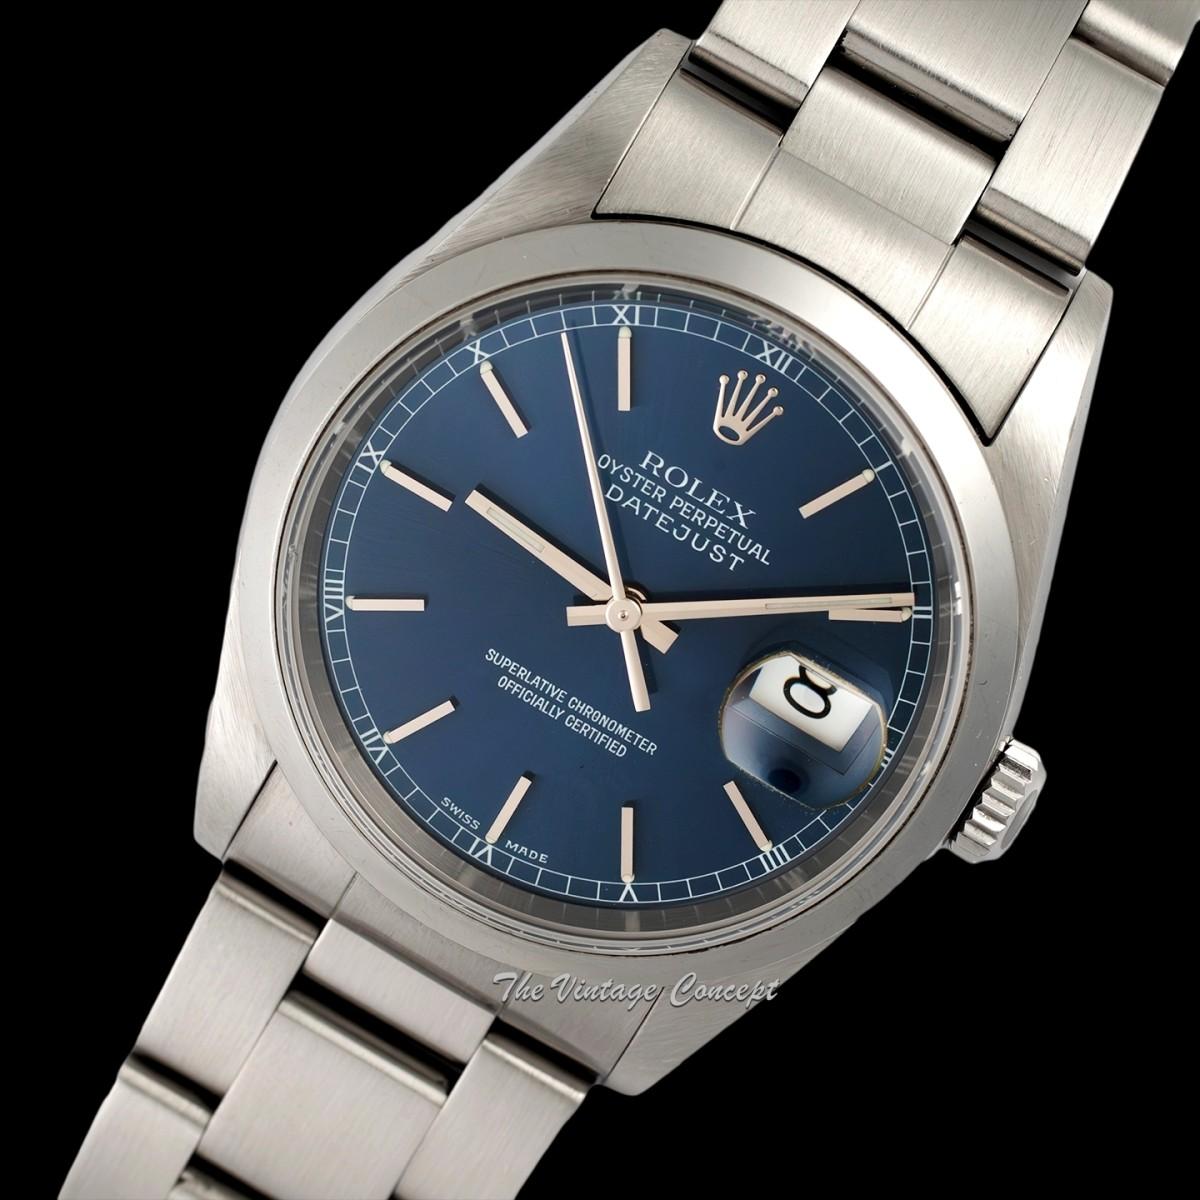 Rolex Steel Oyster Perpetual Datejust Blue Dial 16200